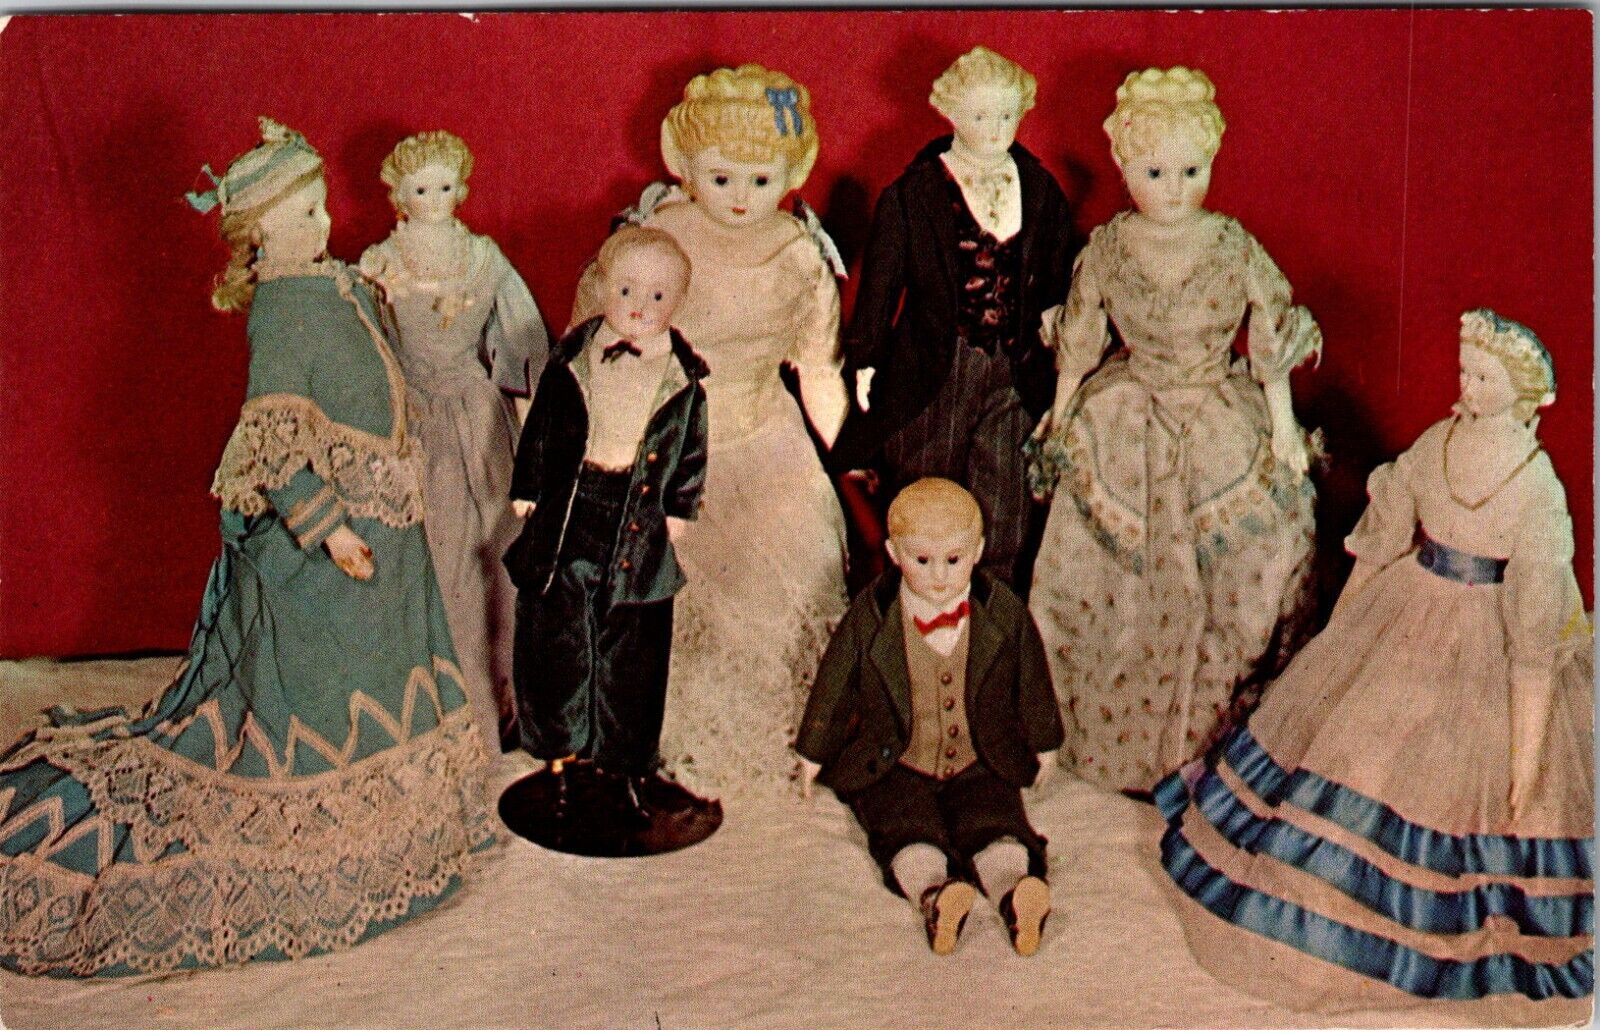 Milan, OH Collection of Dolls at Milan Historical Museum Vintage Postcard A799